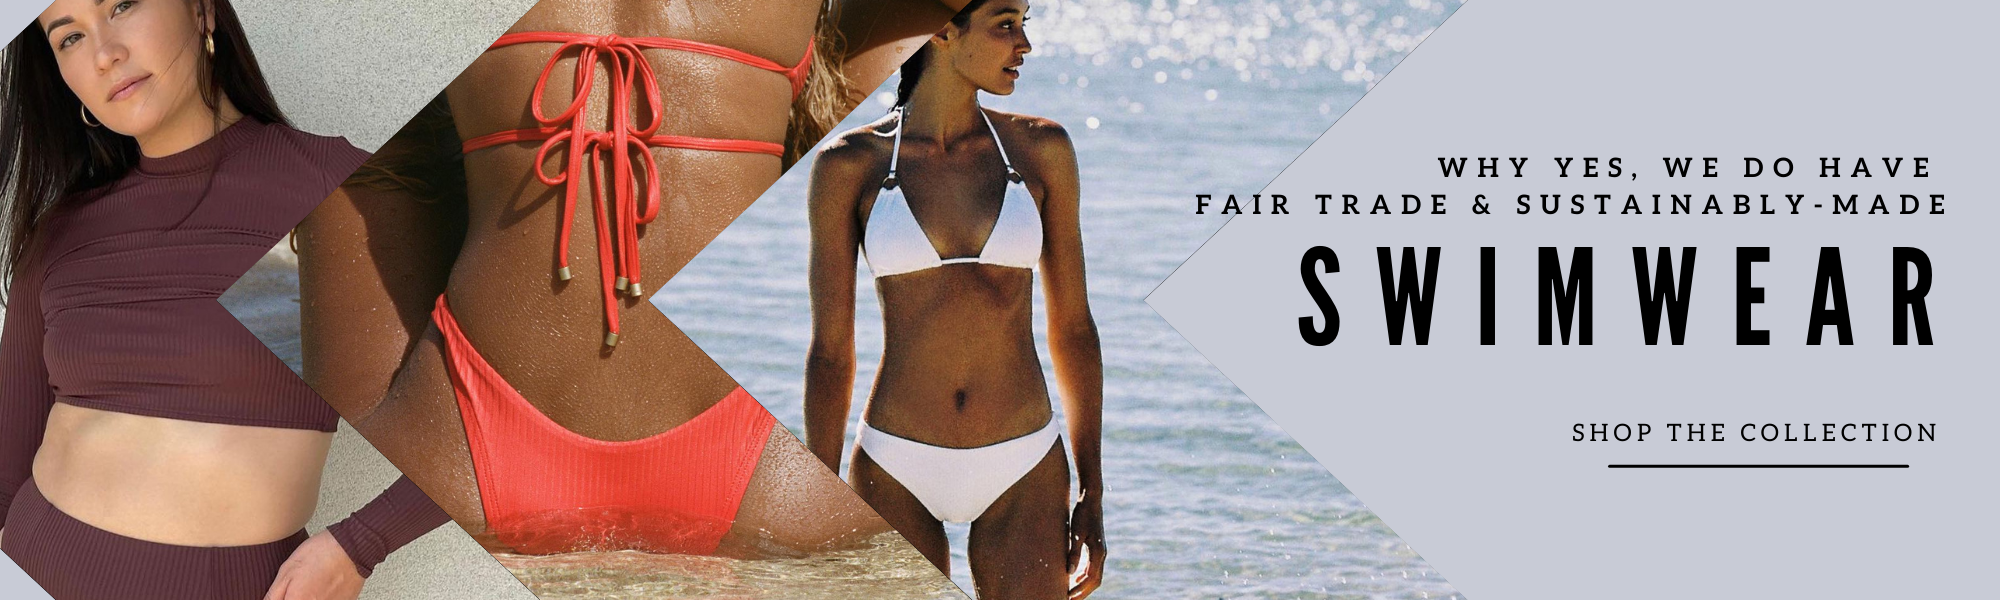 Shop Ethical and Sustainable Swimwear